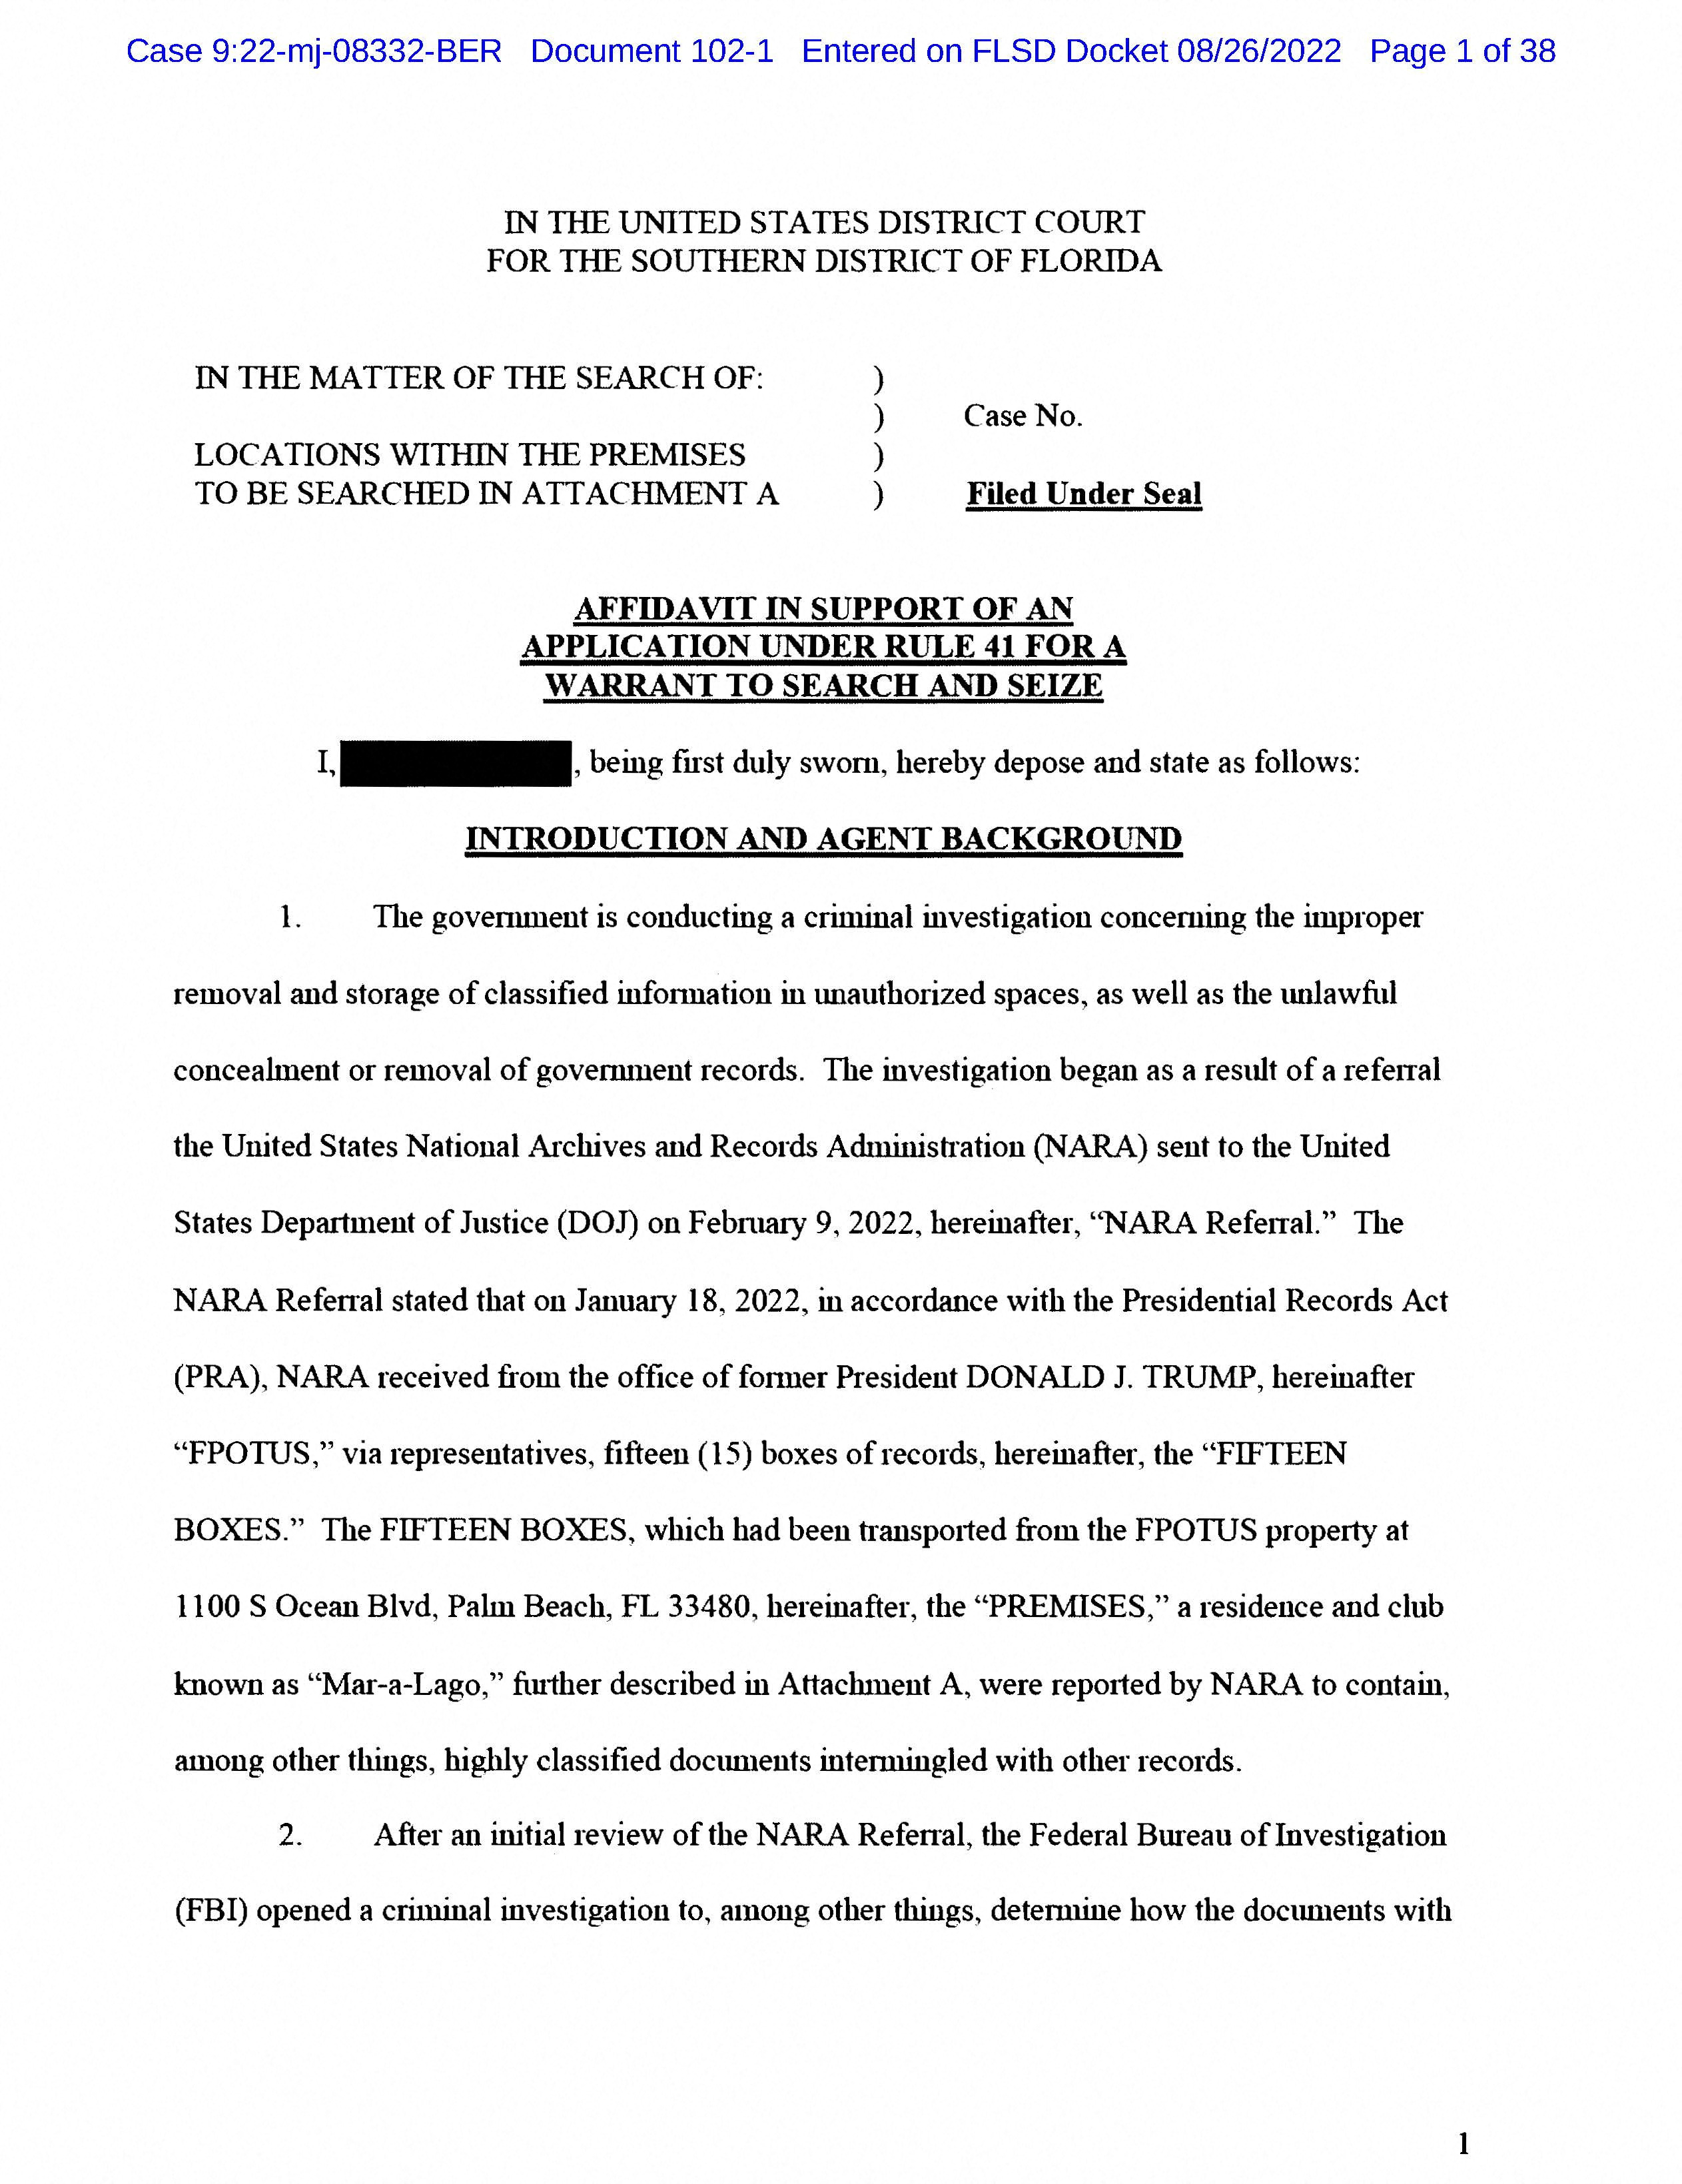 Afffidavit supporting the FBI search of former U.S. President Donald Trump's Mar-a-Lago estate is seen after being released by U.S. federal court in Florida